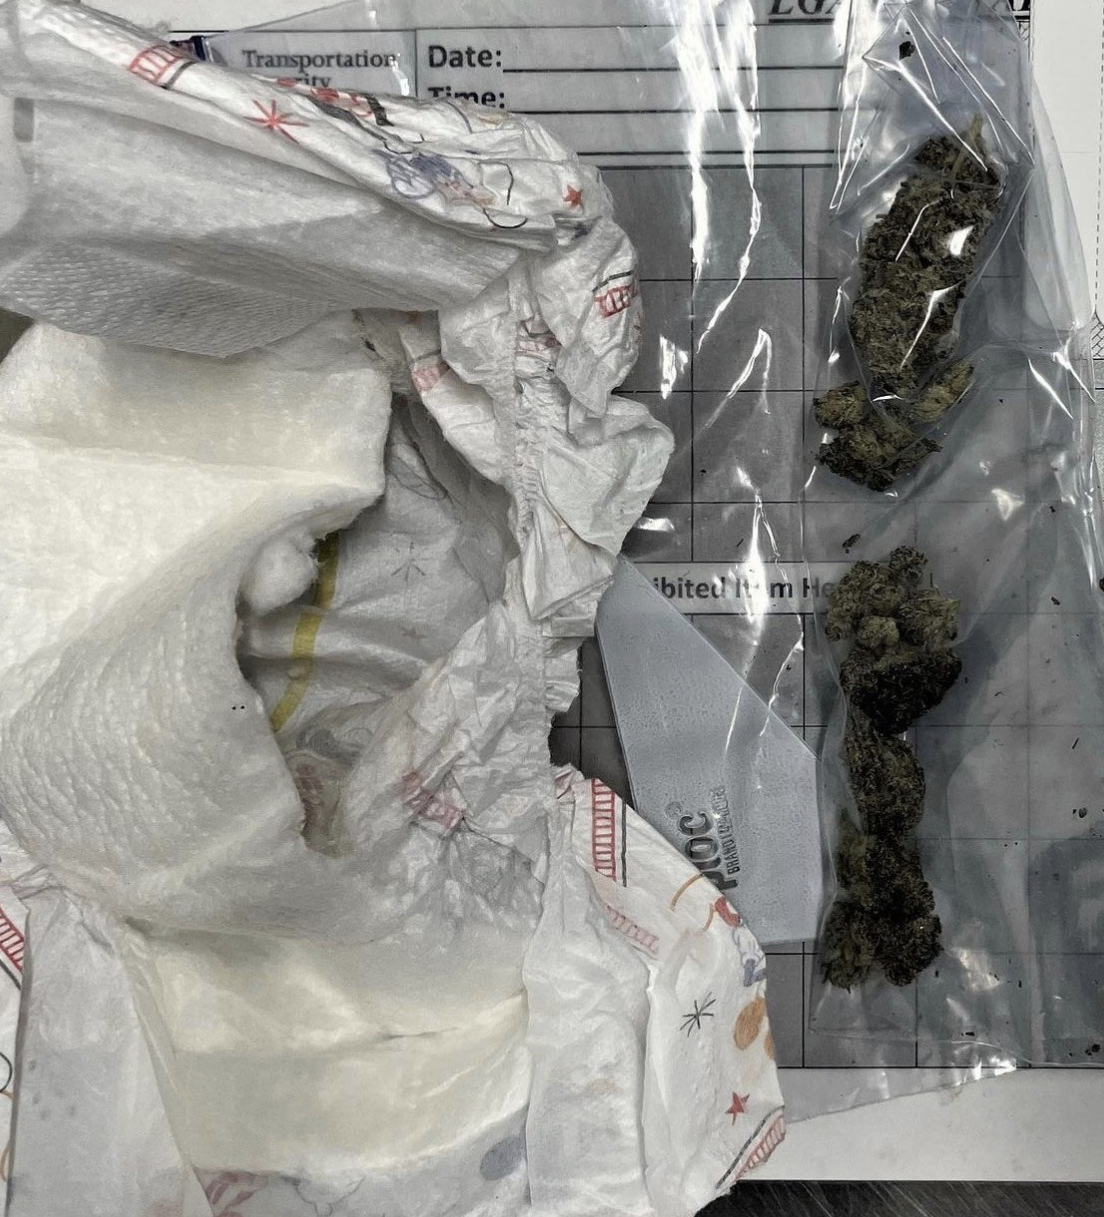 tsa at laguardia found weed in a woman's adult diaper that she was wearing - Transportation Date Ame bited it m He